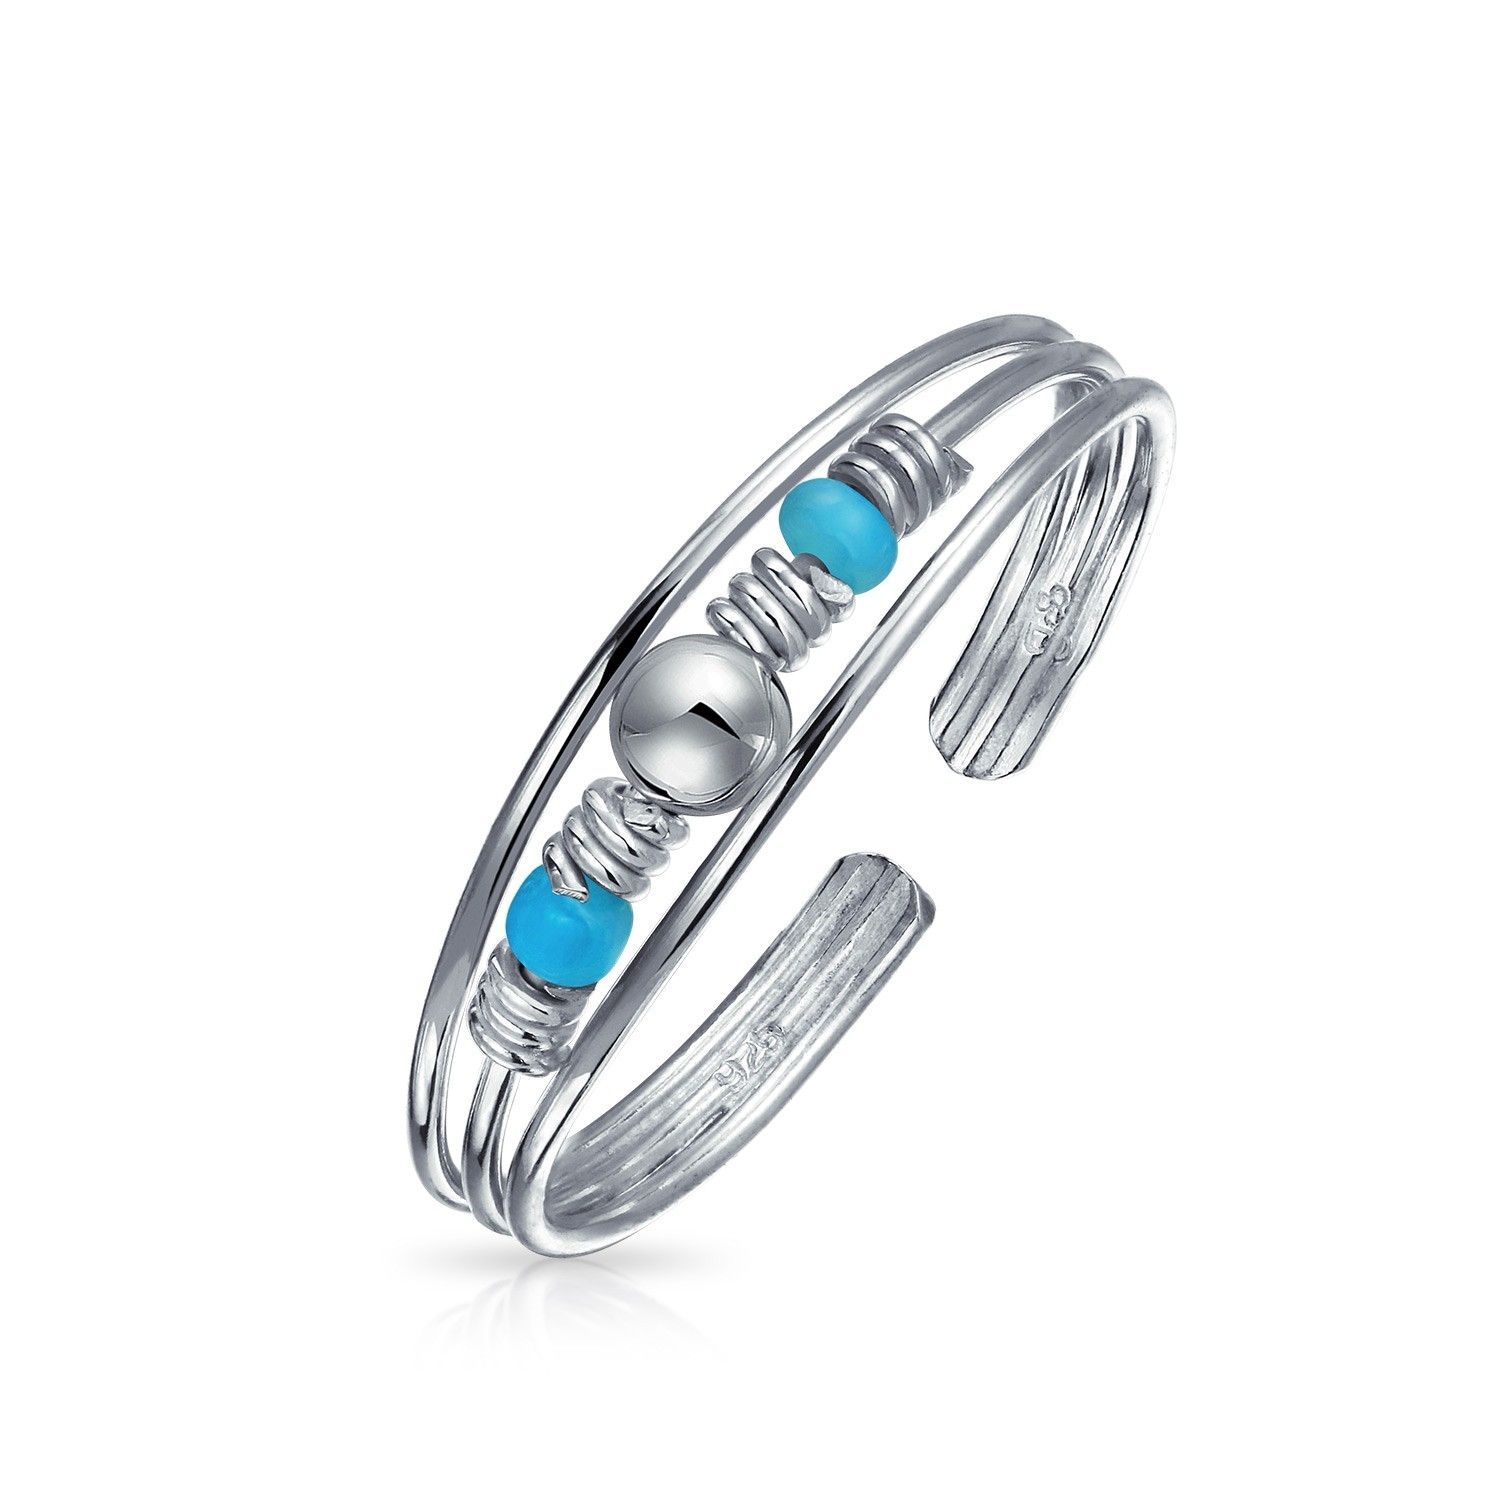 Turquoise Beaded Toe Ring December Birthstone Silver Midi Rings Pertaining To Latest Beaded Toe Rings (View 9 of 15)